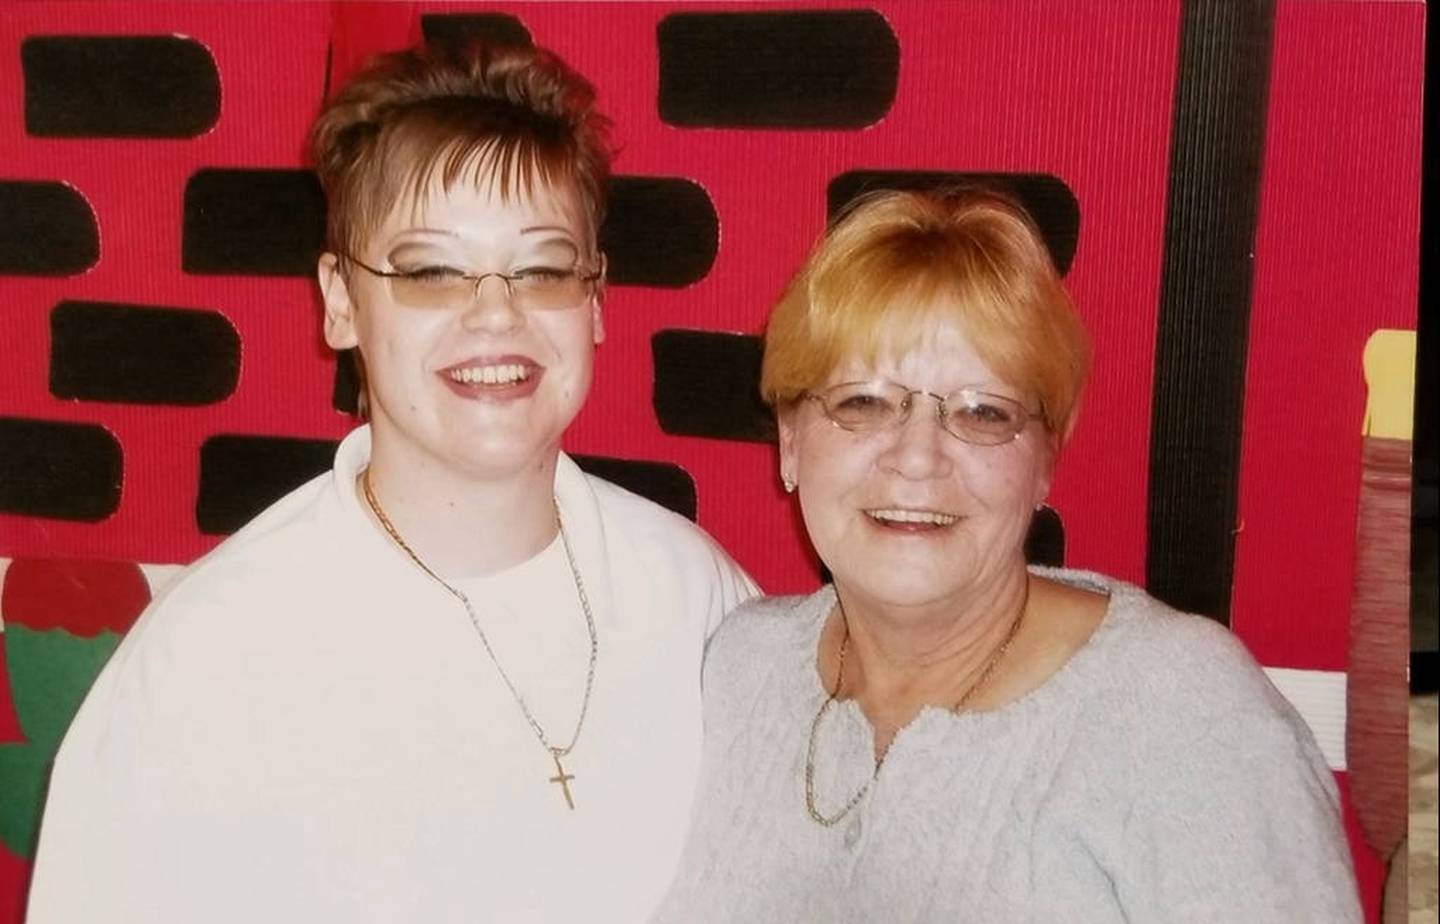 Jennifer McMullan is pictured with her mother, Linda Johnson.